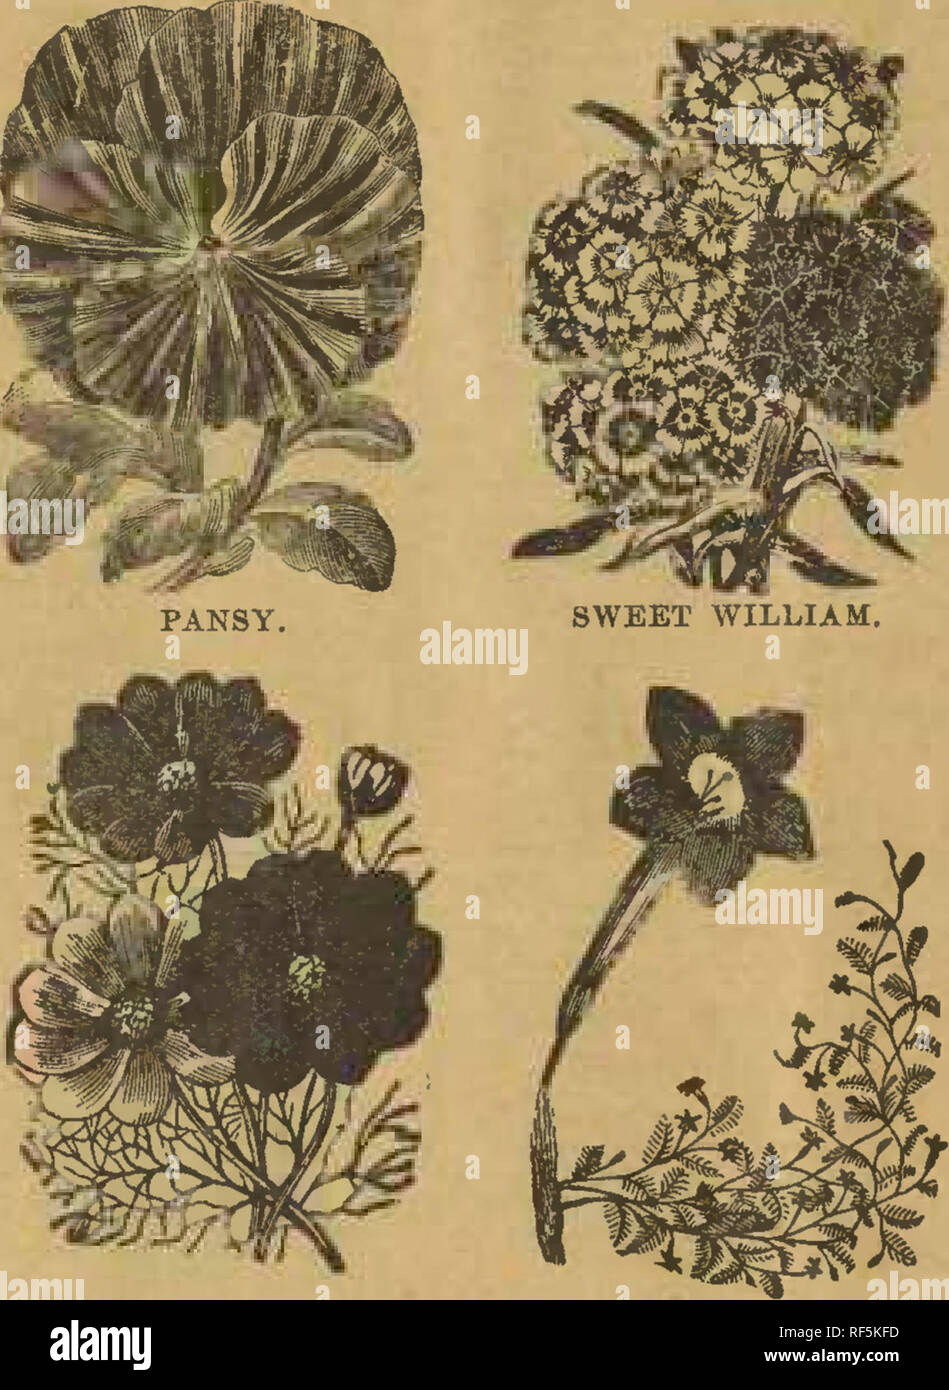 . 20th year. Nursery stock Missouri Carthage Catalogs; Vegetables Seeds Catalogs; Flowers Seeds Catalogs; Grasses Seeds Catalogs; Gardening Equipment and supplies Catalogs. COSMOS. CYPRESS VINE. ASTER. GOURDS. Hercules Club, Oranger-Mock Orange. Sugar Trough—Of ten used for buckets. Dish Cloth—Or Chinese Sponge (Luffa). ,^est Egg—Excellent for nest eggs. ^iiBlC AMARANTH—Favorite everlaat- ing flower. Forget-Me-T^ot—True Blue (Myosotls Al- peslies), Helichrysum—Double, fine mixed, everlast- ing flowers. Hollyhock—Double, mixed, 10c. Lobei^ia—Erinuss, blue, for edging pots or rockeries, 10c. Lob Stock Photo